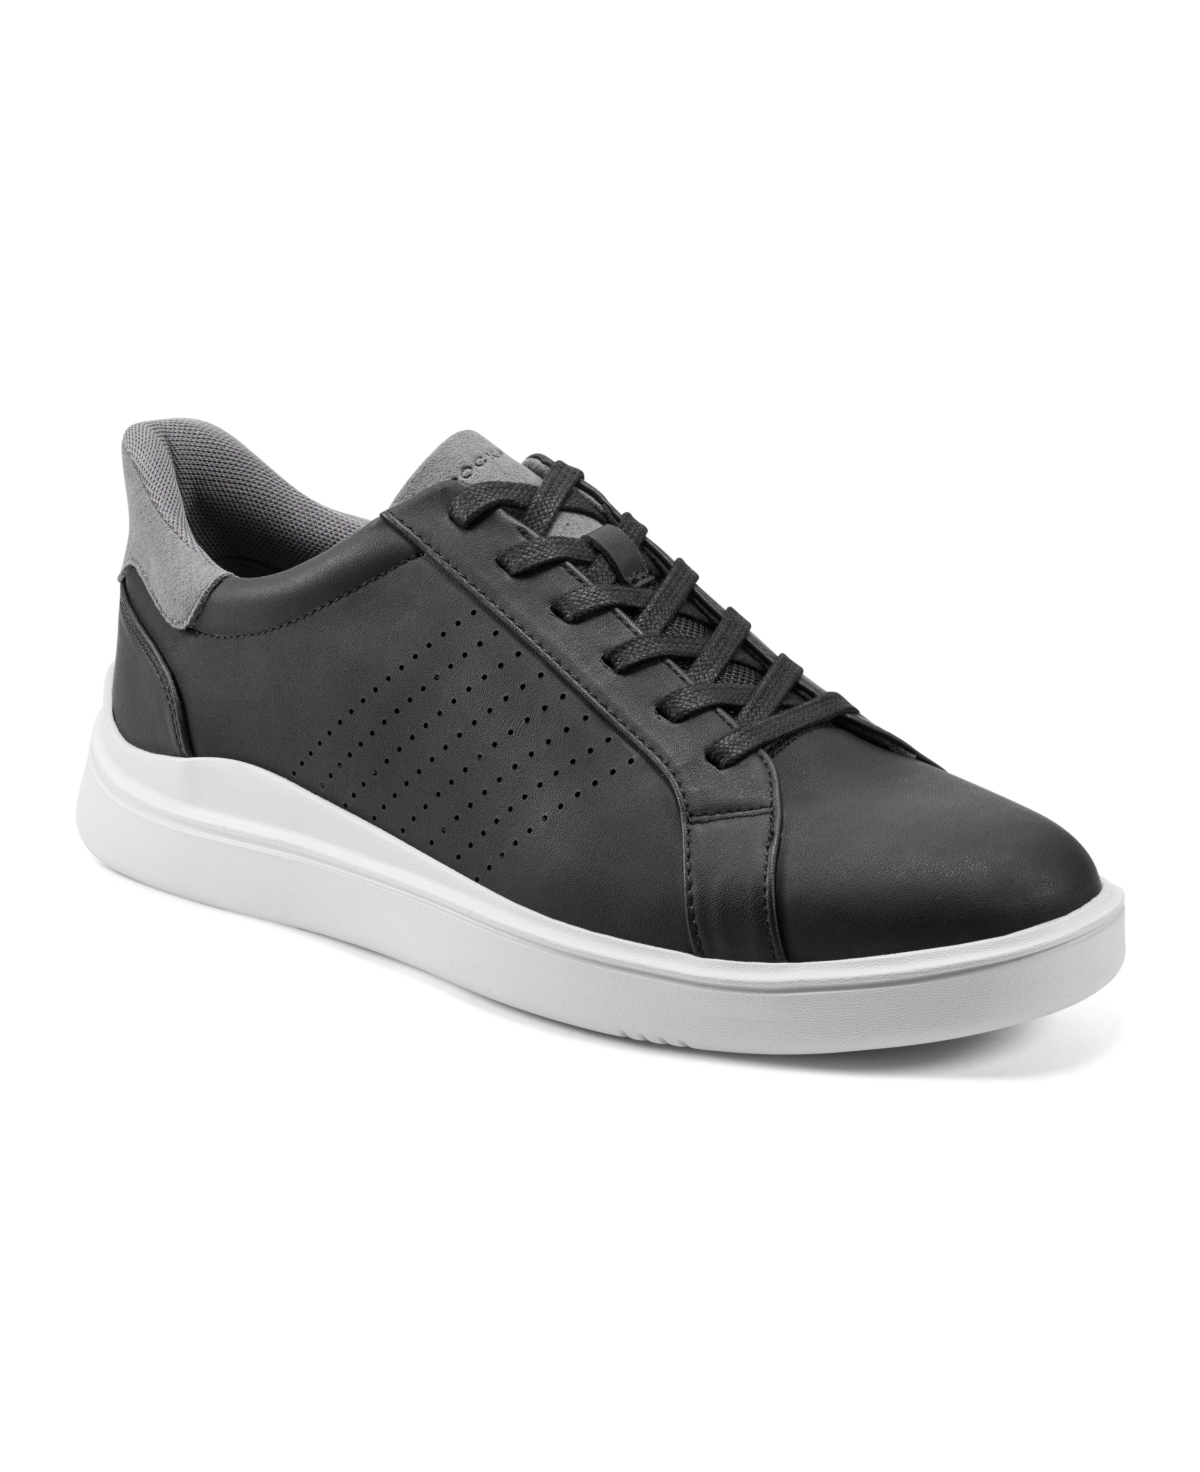 Men Tristen Step Activated Lace Up Sneaker - White